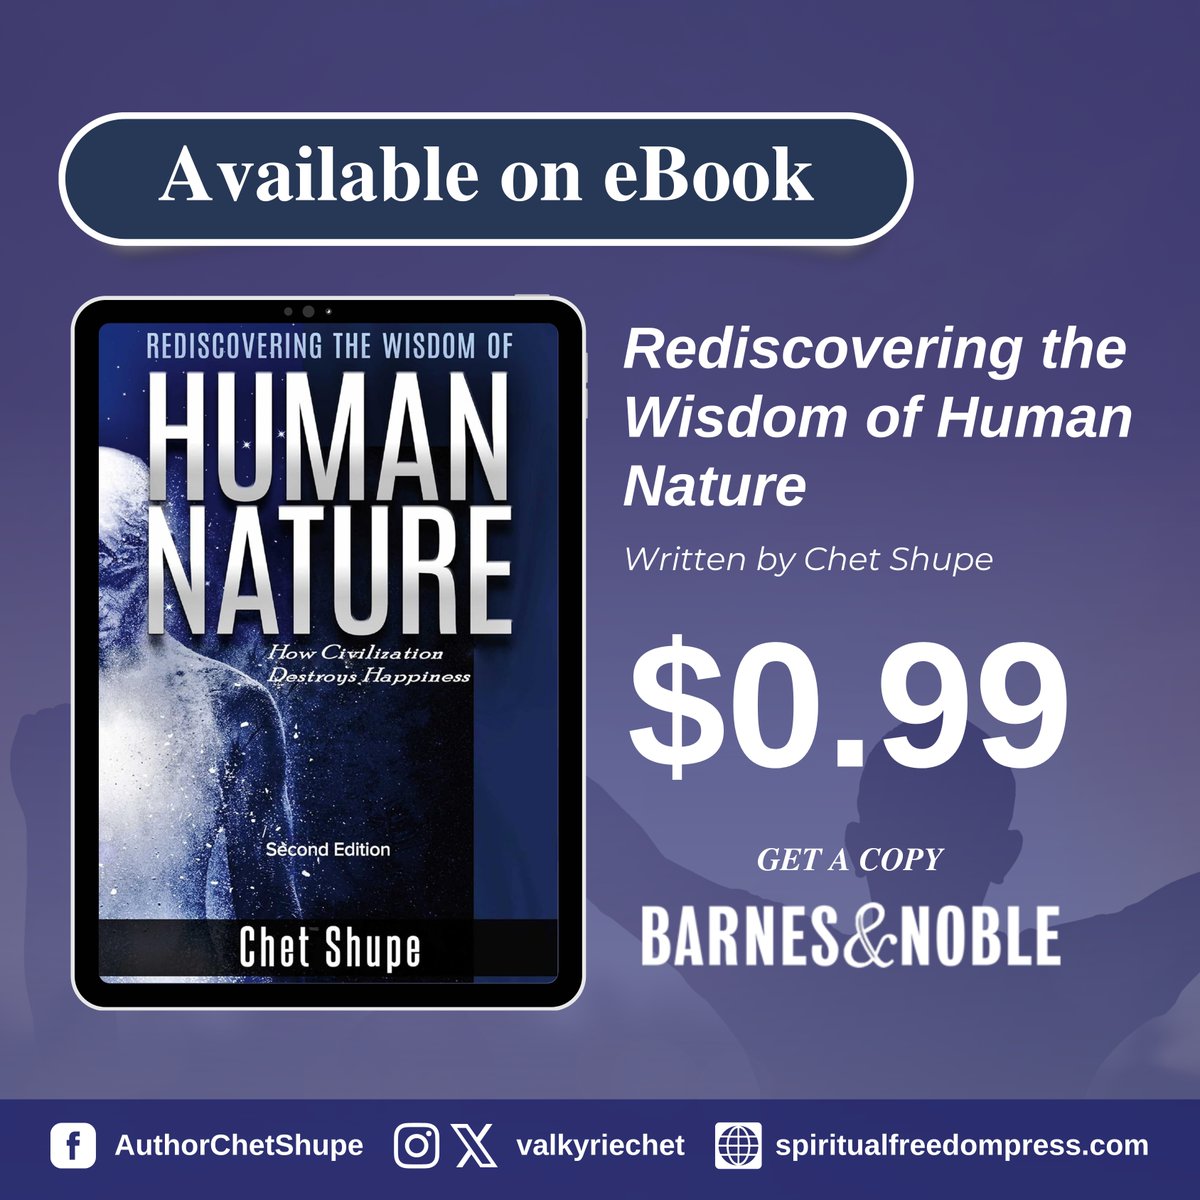 Craving a story that will enlighten you? Dive into Rediscovering the Wisdom of Human Nature by Chet Shupe! The book explores a unique perspective of how people will confuse their happiness with materialistic perspectives as the world progresses.